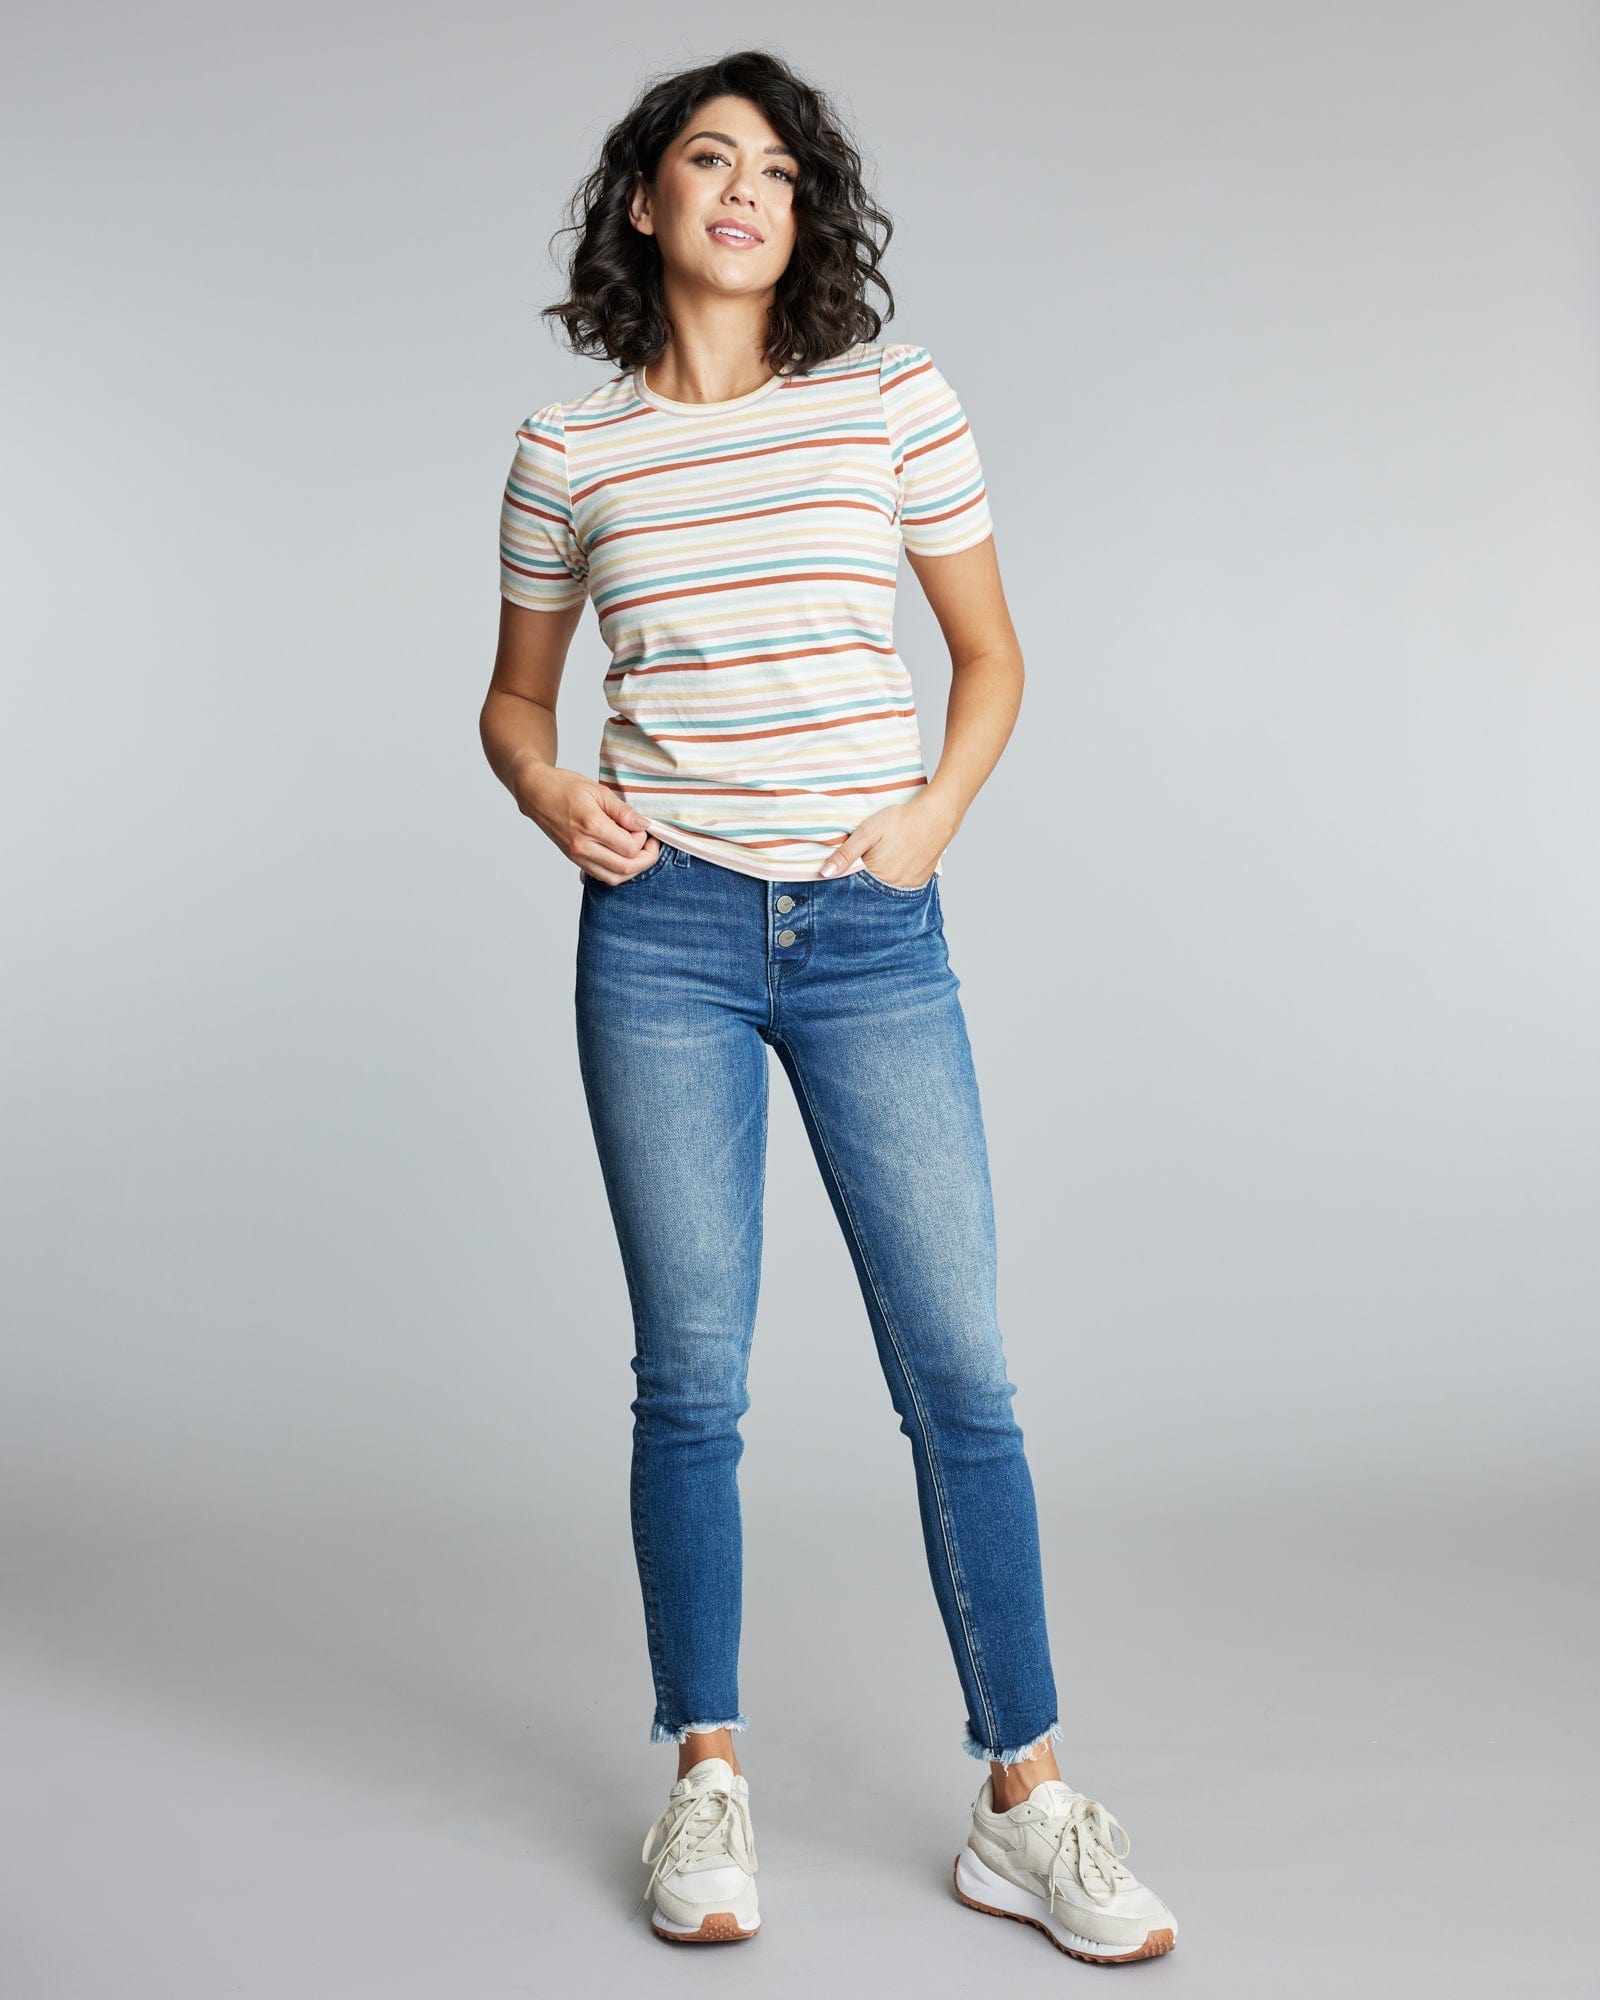 Woman in a short sleeve striped t-shirt